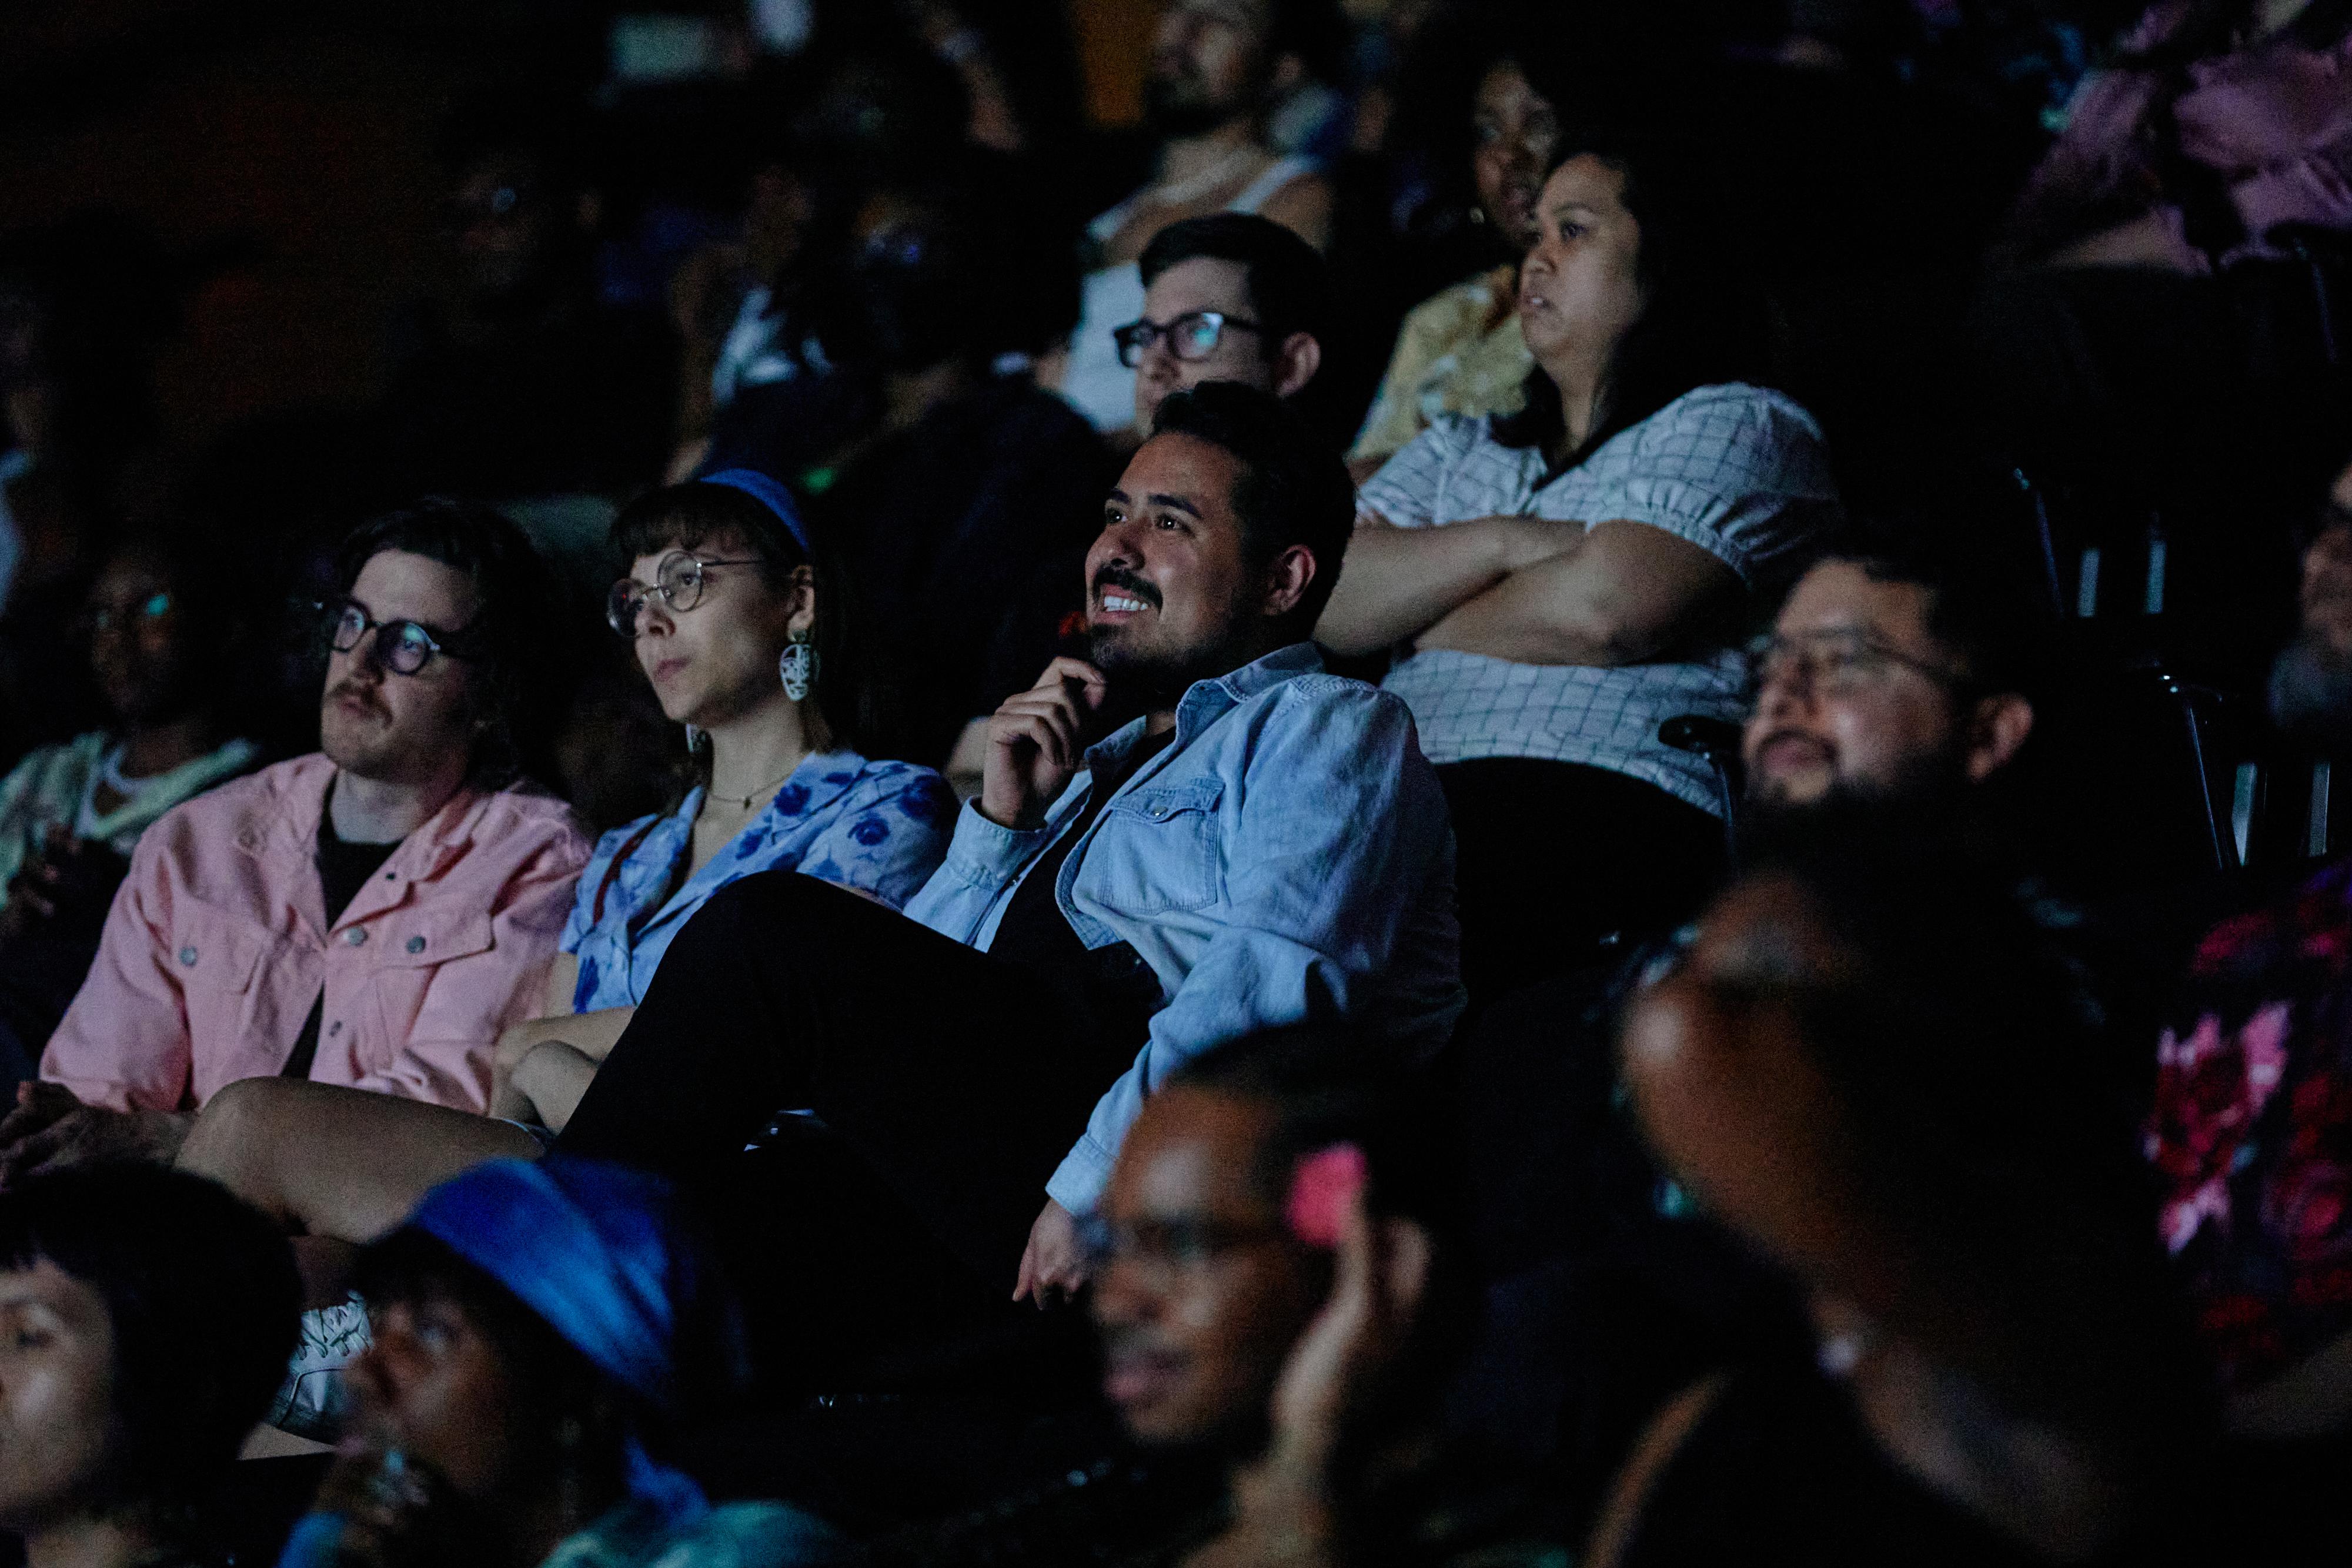 Candid photo of an audience in a darkened theater.